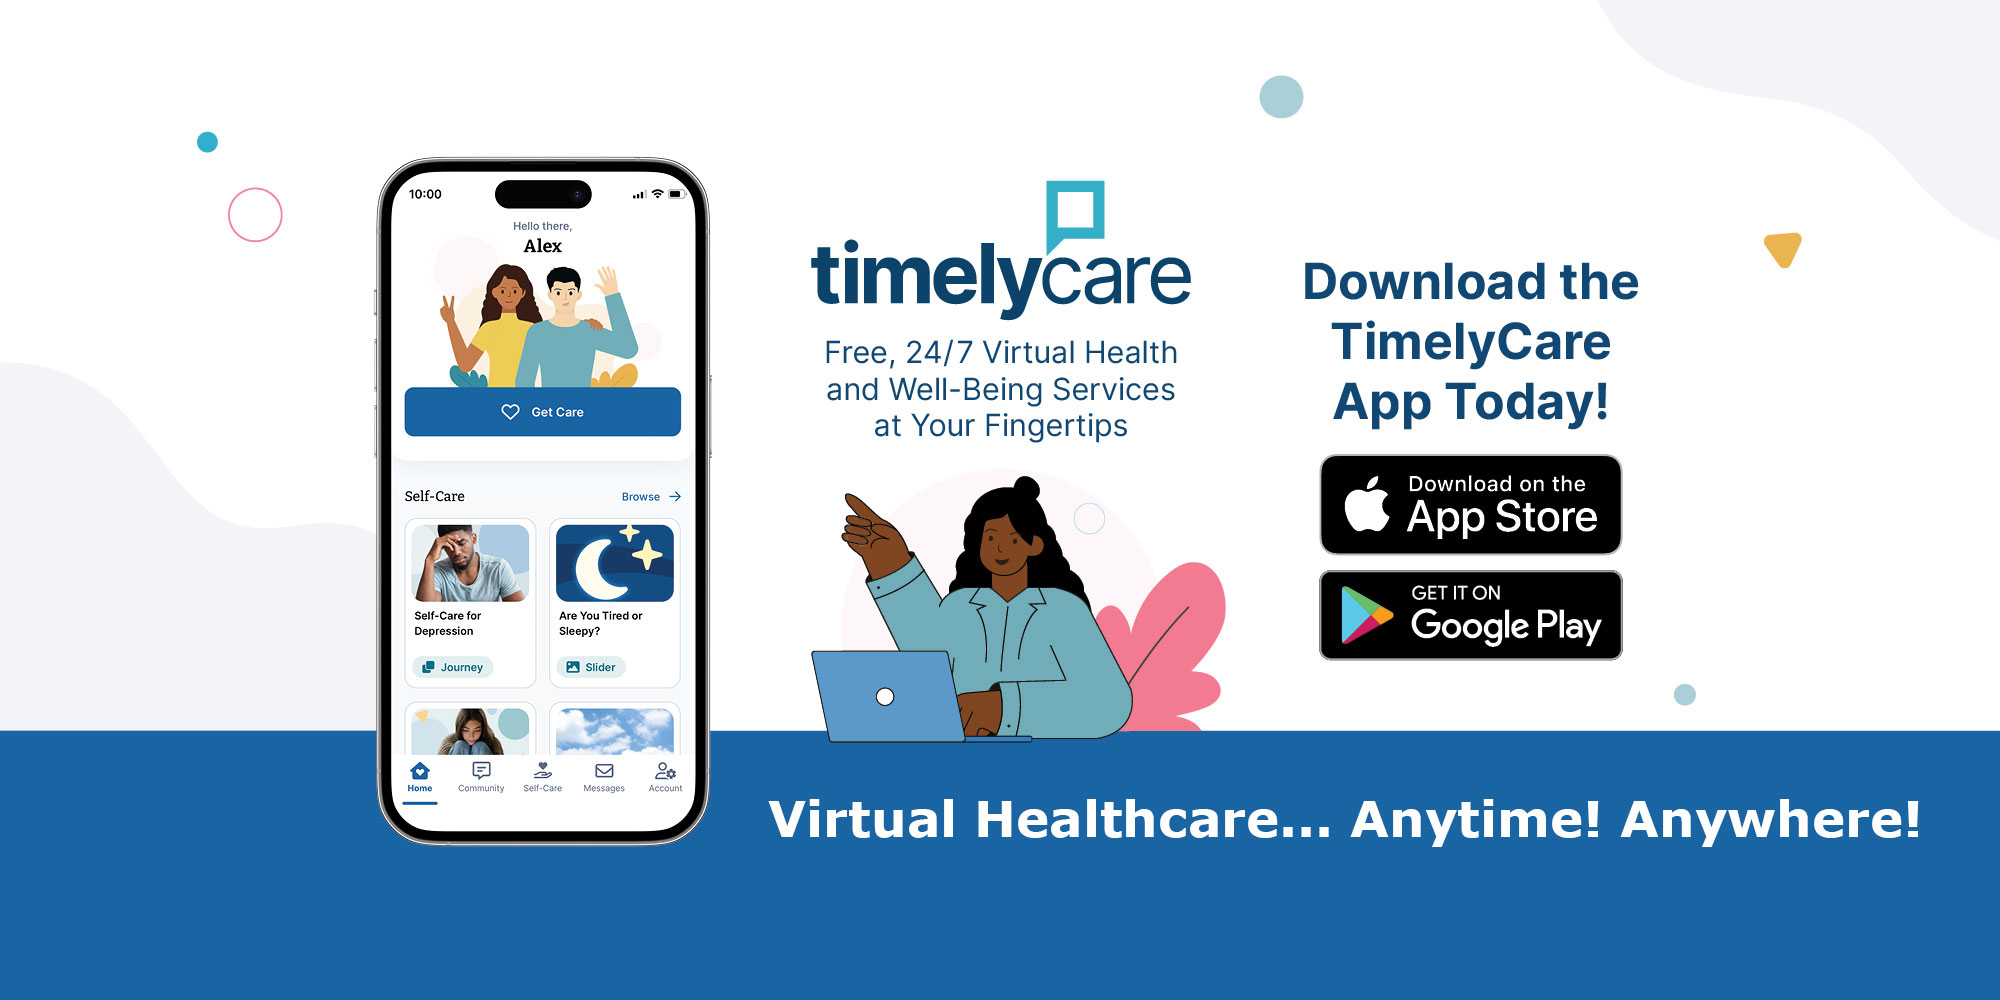 TimelyCare. Virtual Healthcare... Anytime! Anywhere!